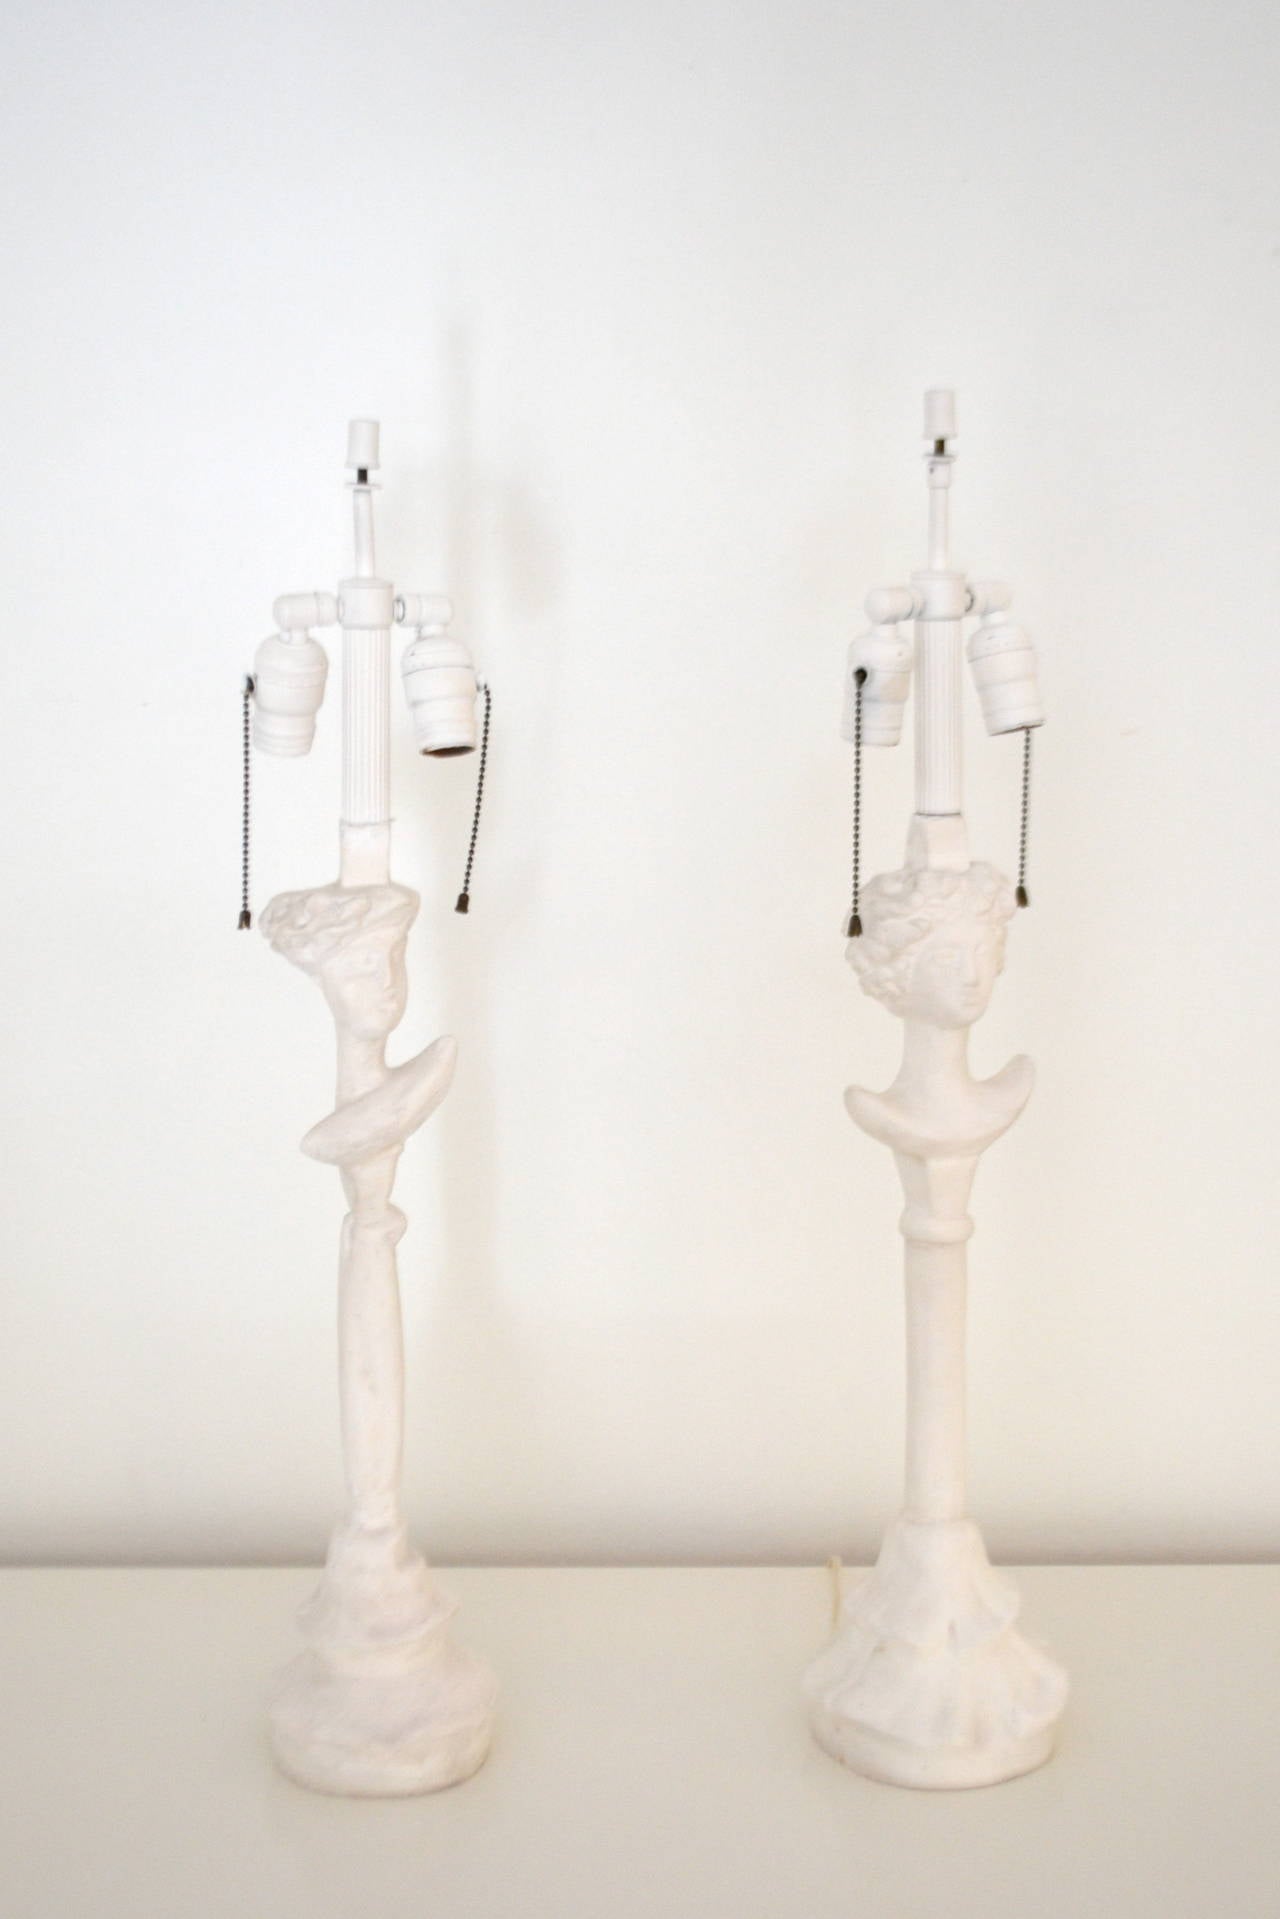 French Pair of Mid-Century Figural Table Lamps after Giacometti for Jean-Michel Fran